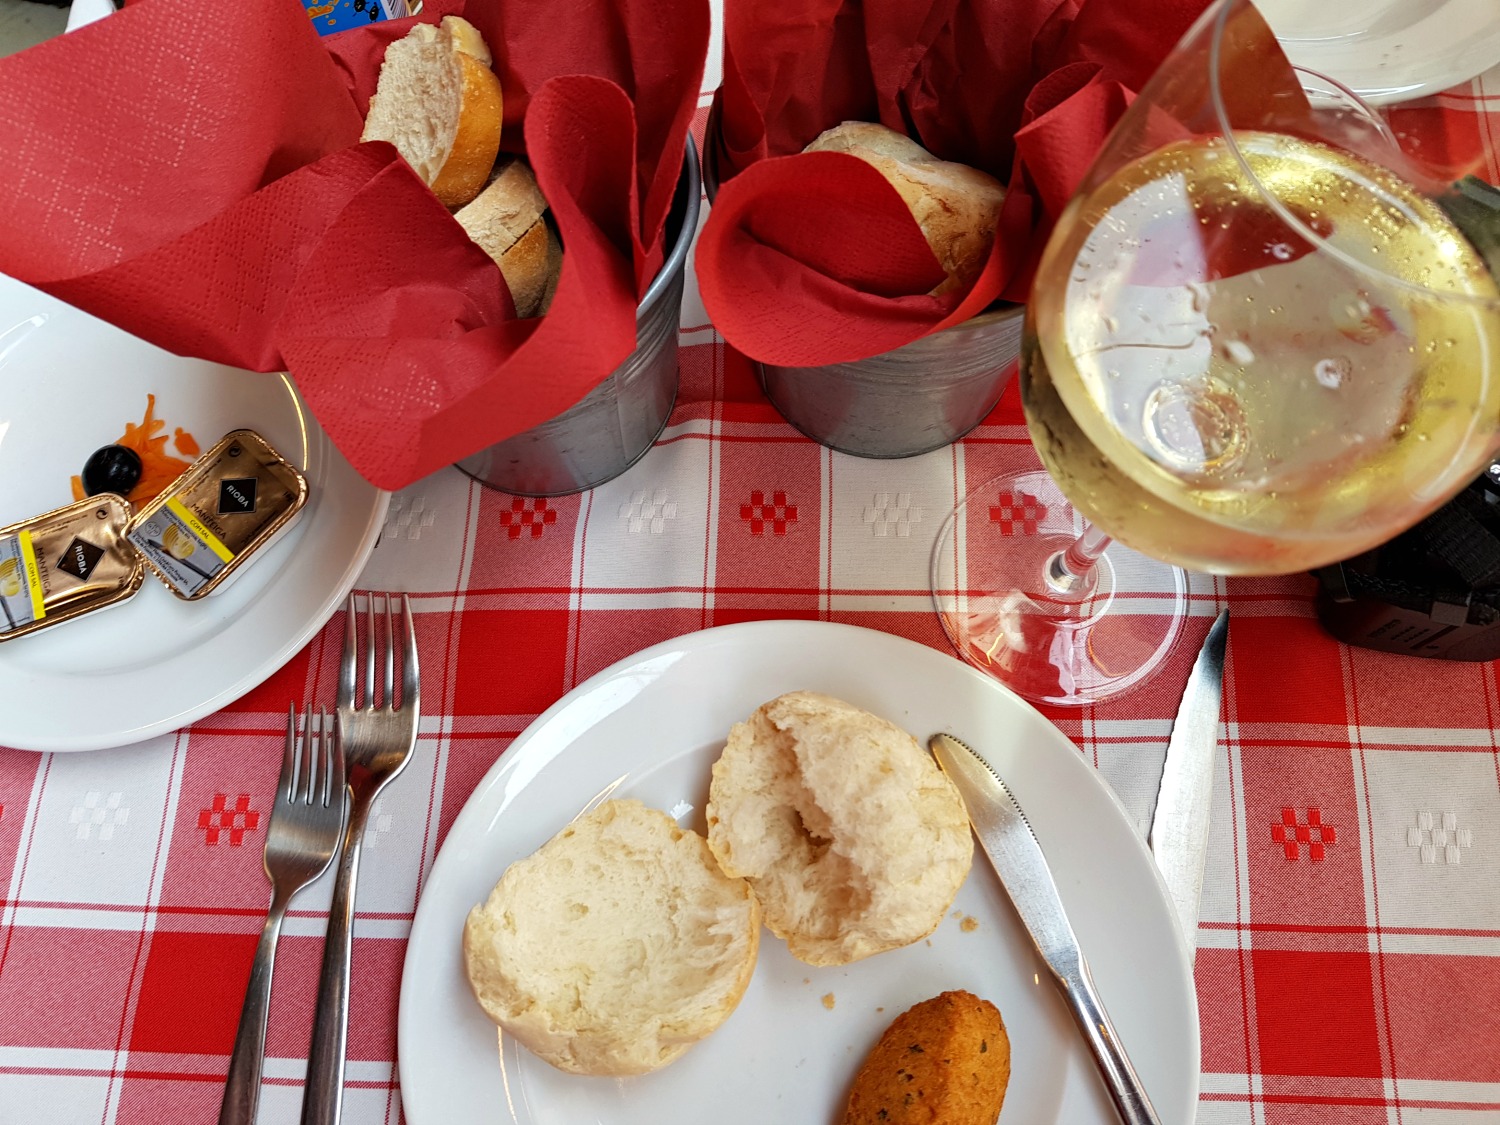 Starting a long lunch in Porto with bread and other snacks as part of the covert - my Porto travel tips and lessons for visiting the city with kids